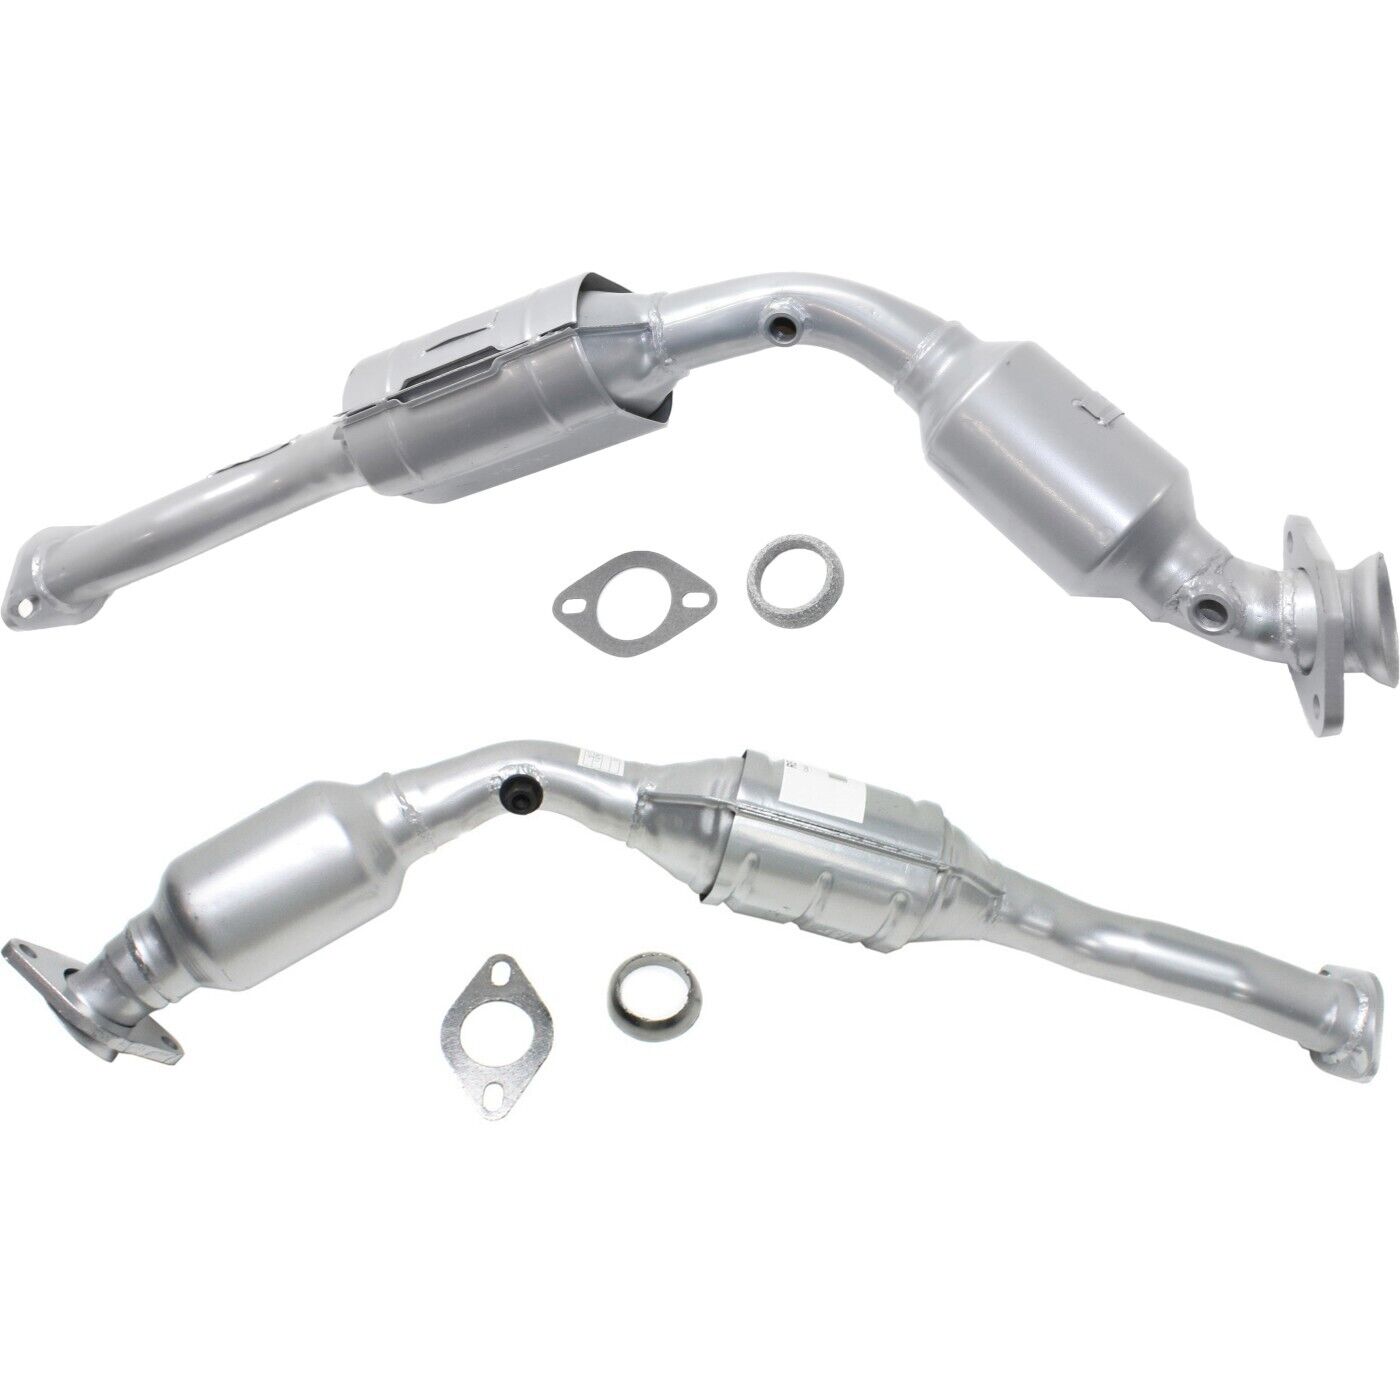 New Catalytic Converter Set For 2002-2011 Grand Marquis Crown Victoria Town Car